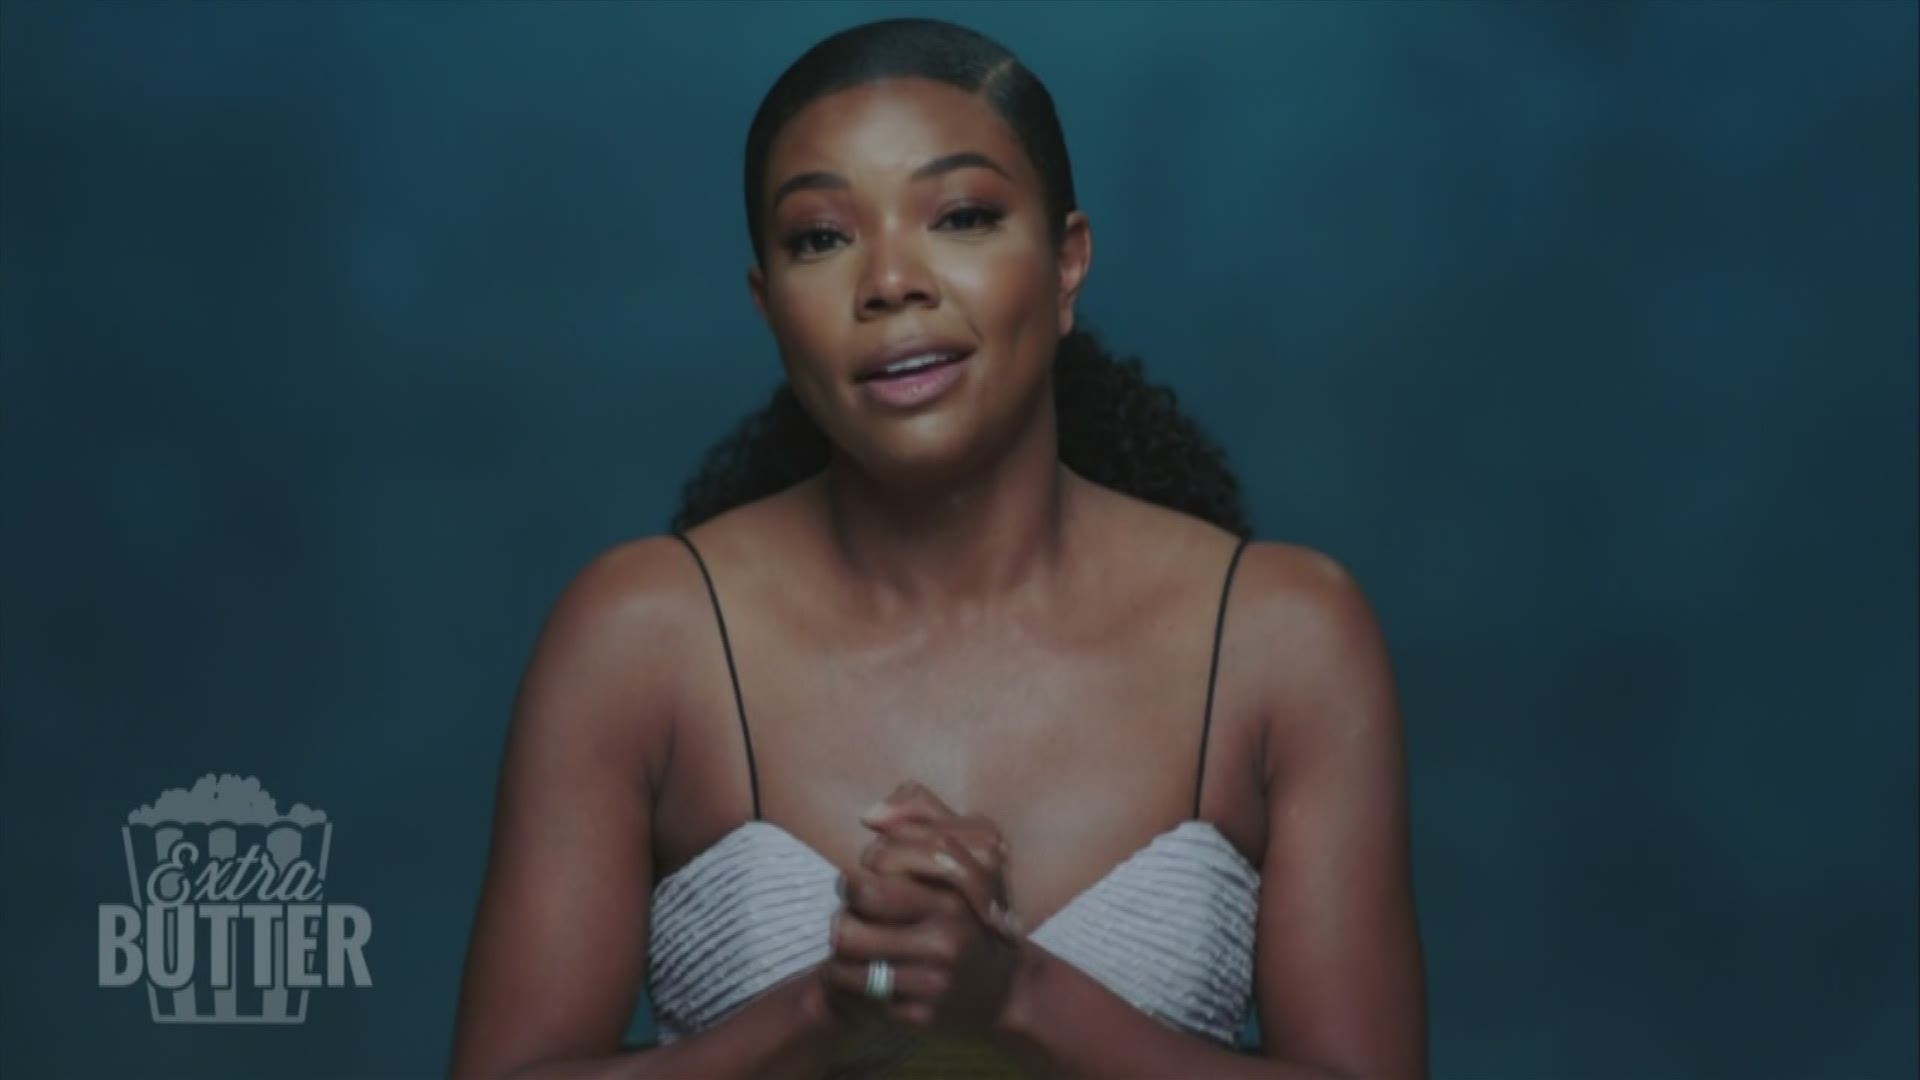 Gabrielle Union wants people to call their mothers and thank them after watching 'Breaking In'. (Interview courtesy of Universal Pictures)